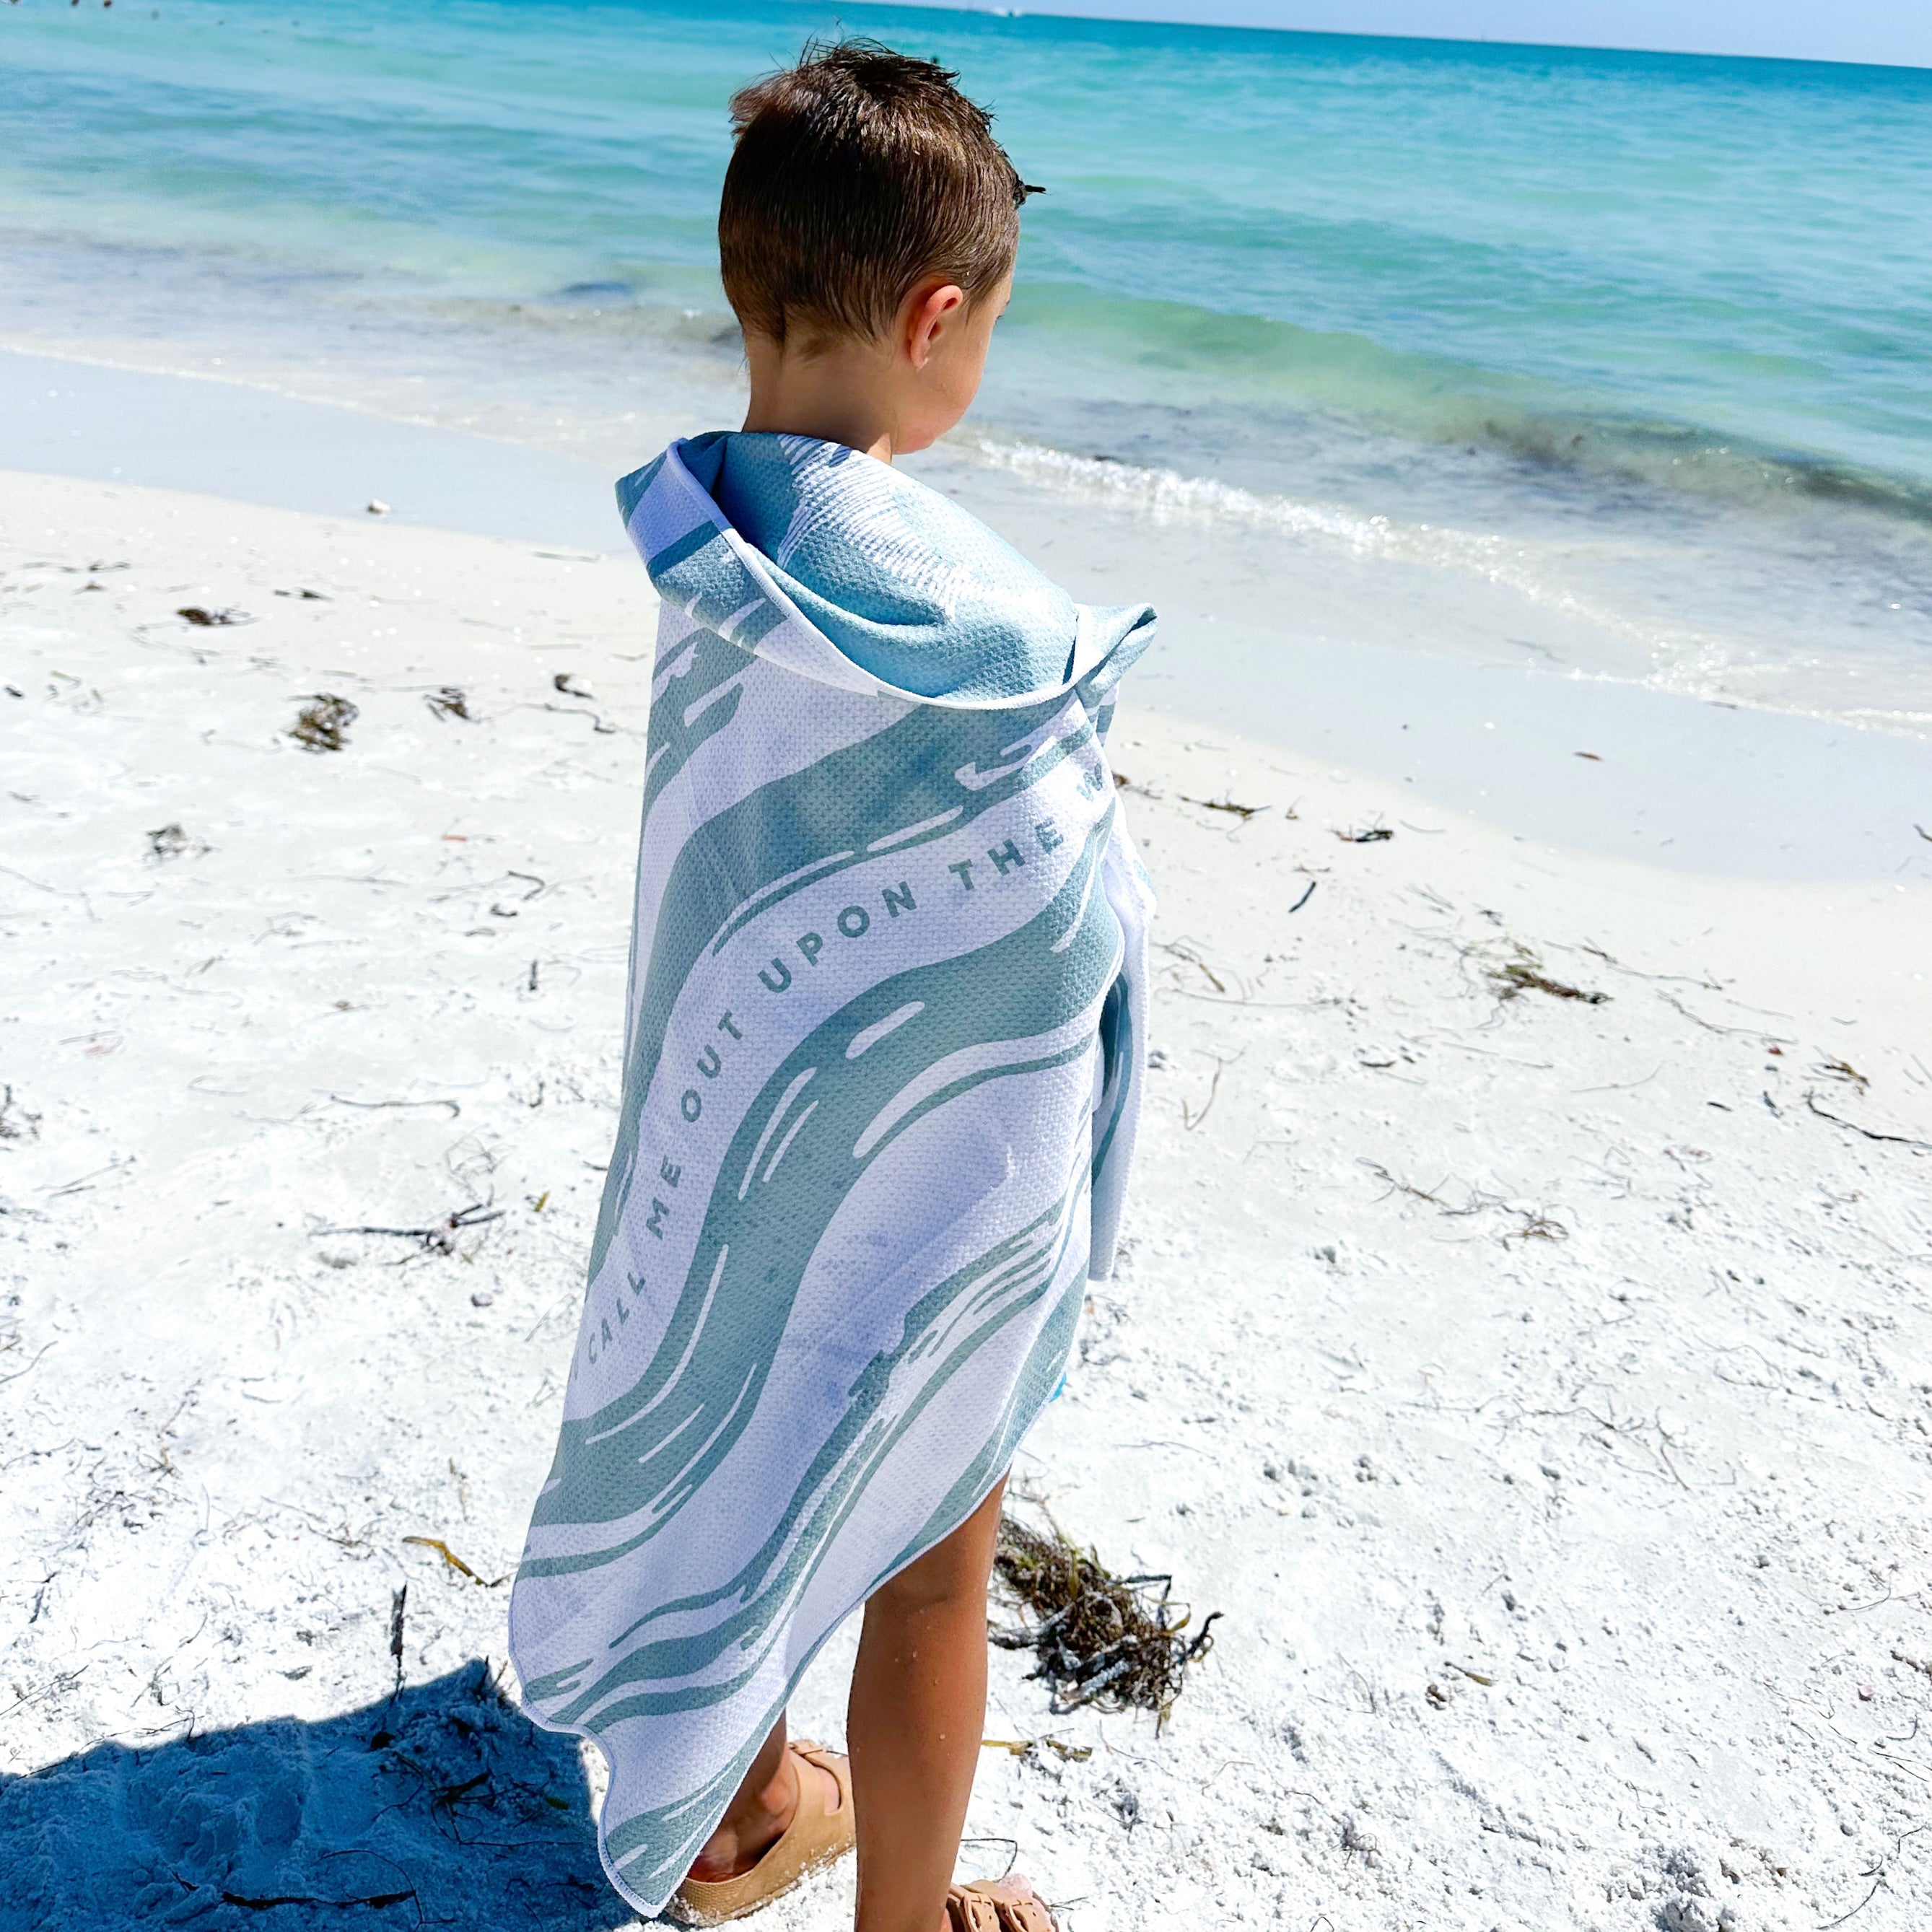 Boy wrapped in towel on beach